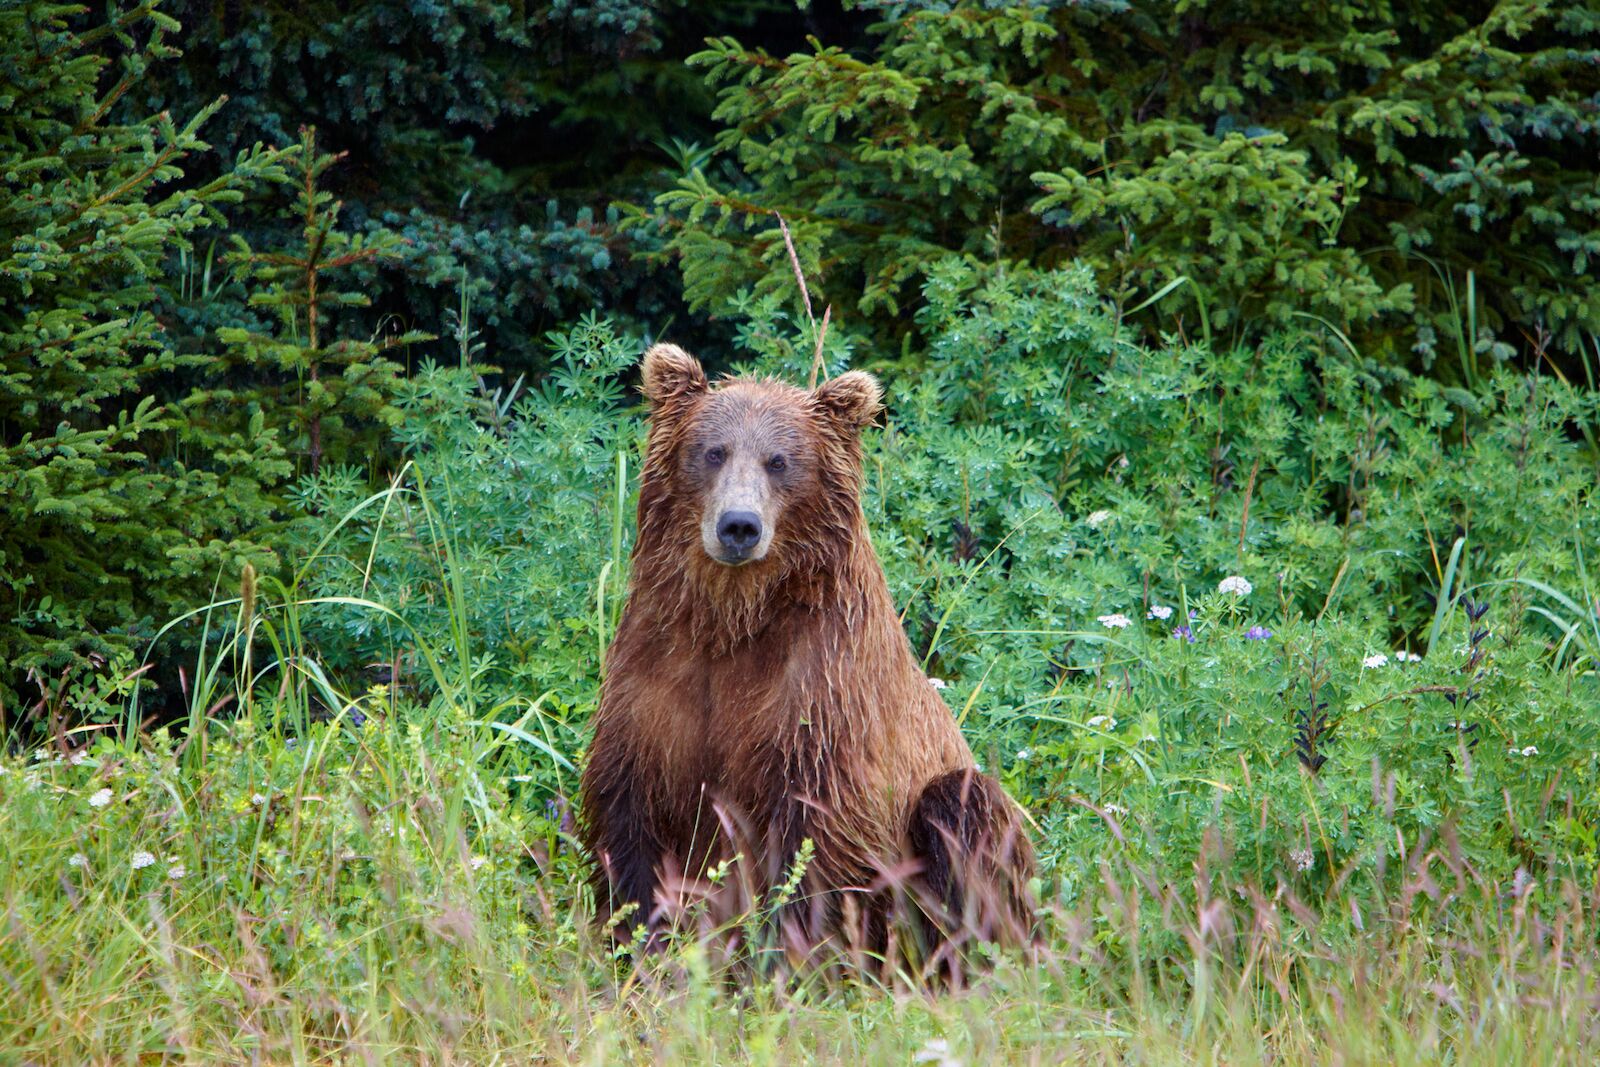 fall is the best time to visit alaska to see brown bears like this one surrounded by grass